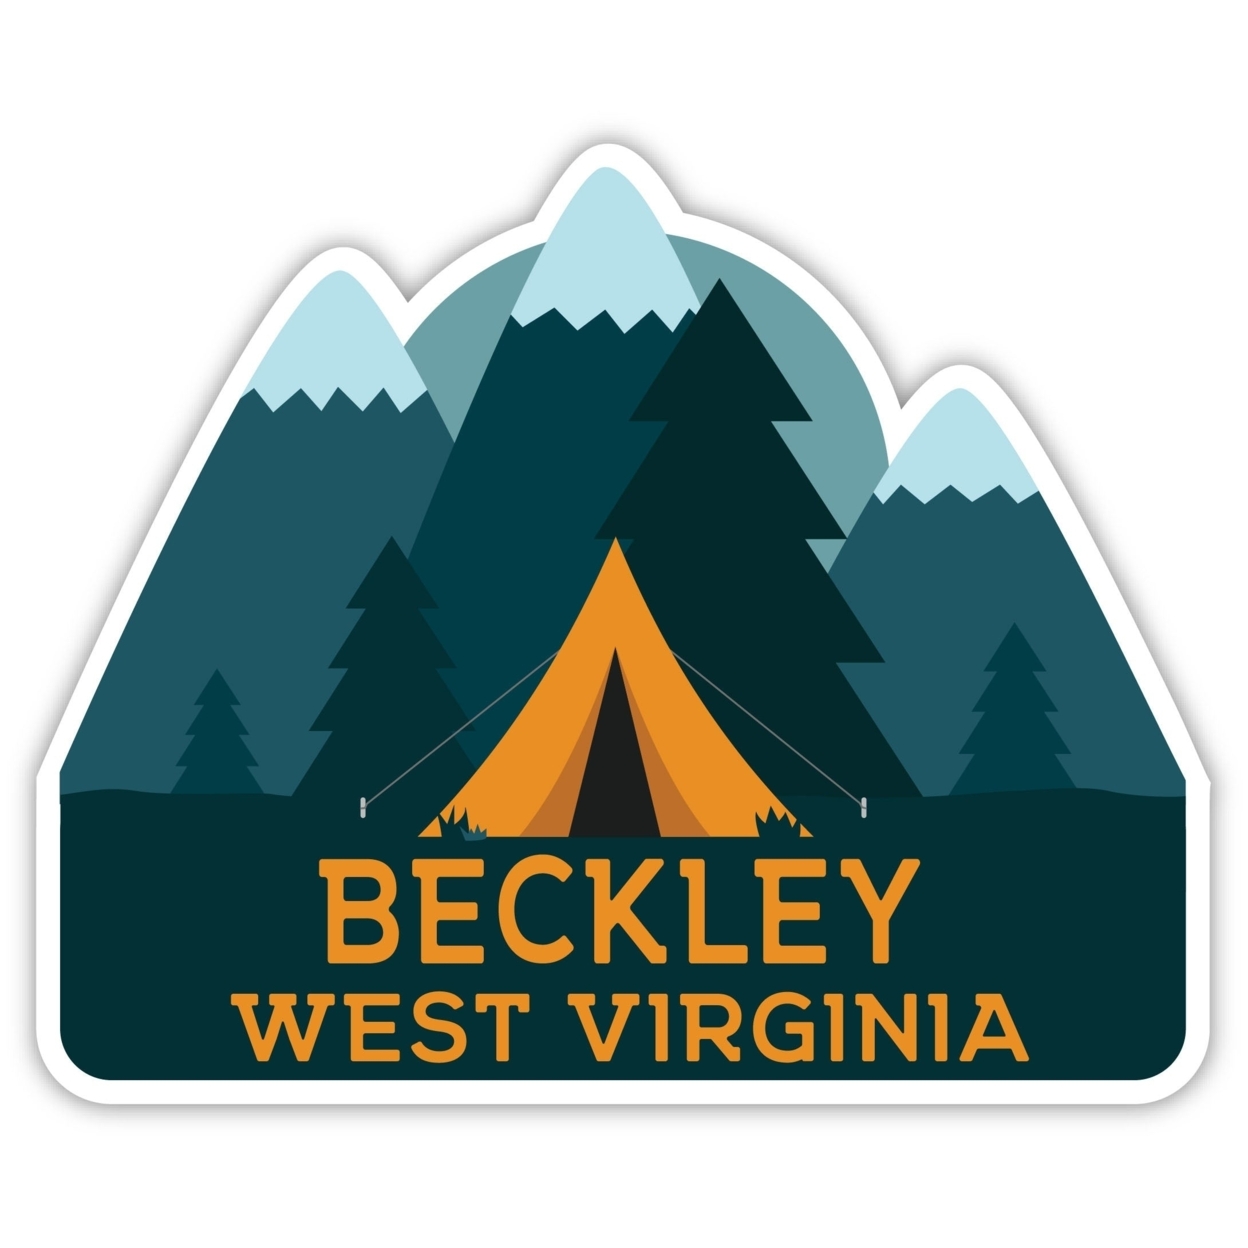 Beckley West Virginia Souvenir Decorative Stickers (Choose Theme And Size) - 4-Pack, 12-Inch, Tent